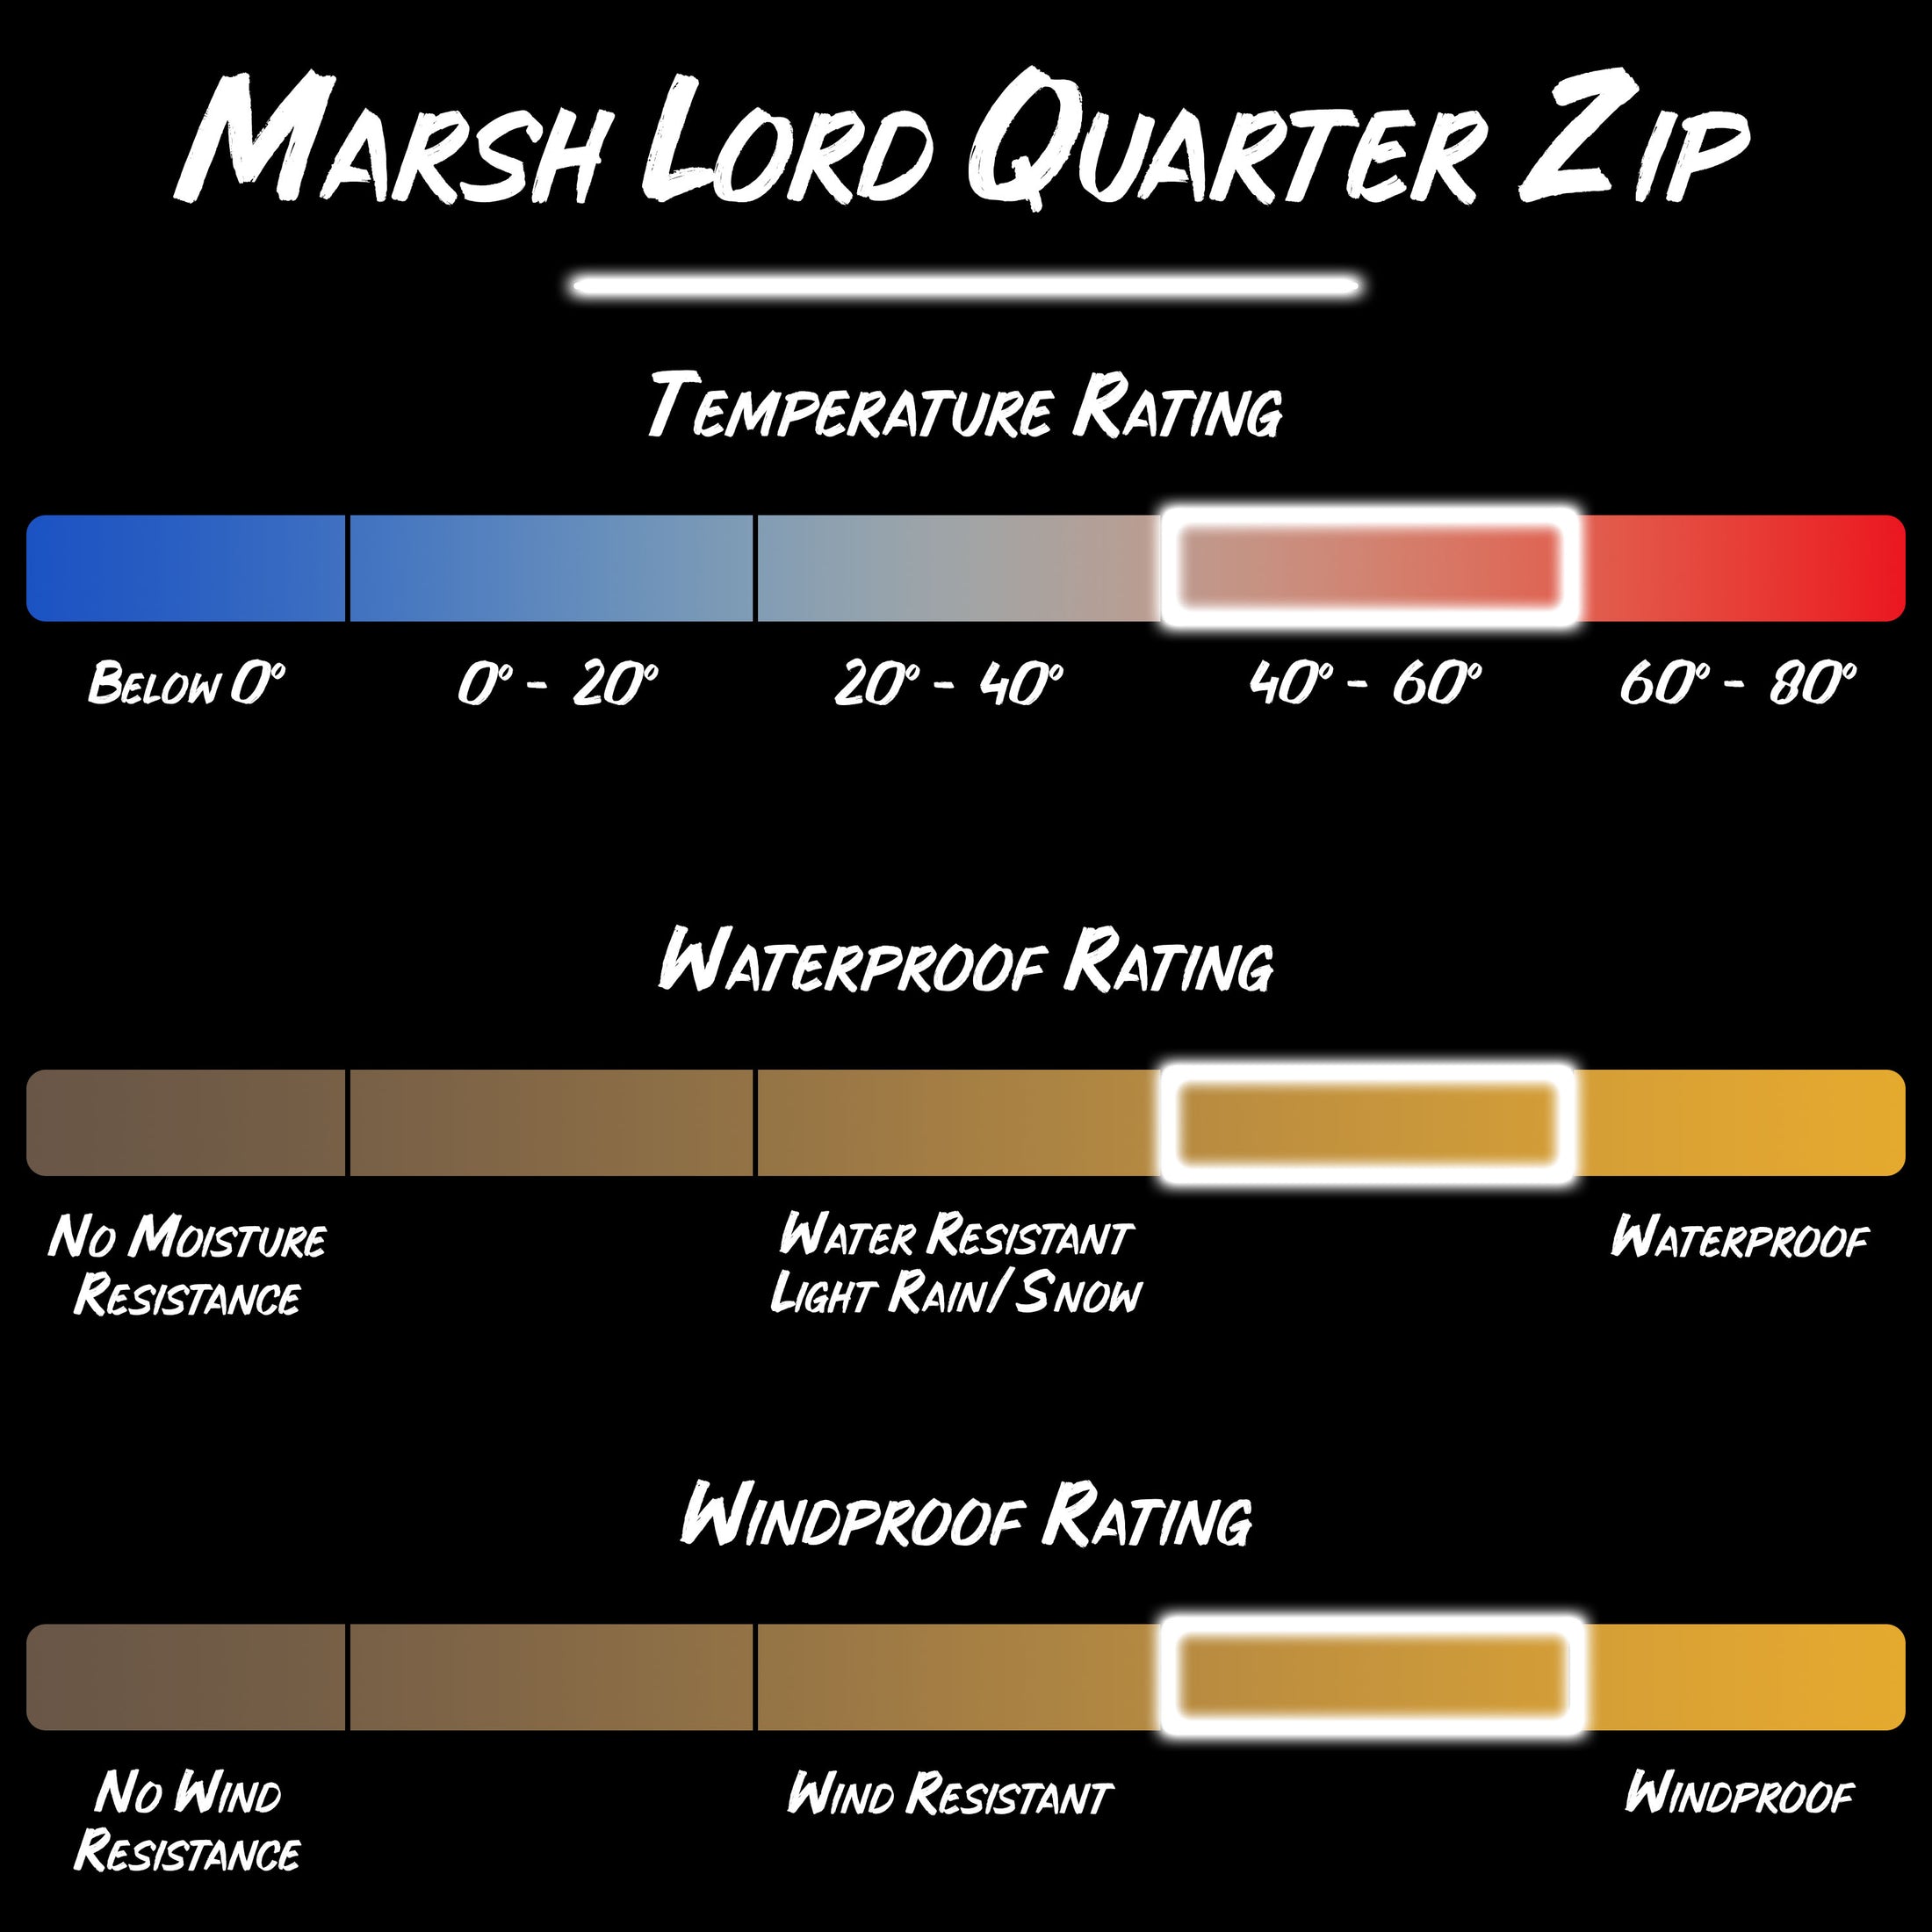 Gamehide marsh lord quarter zip product specifications